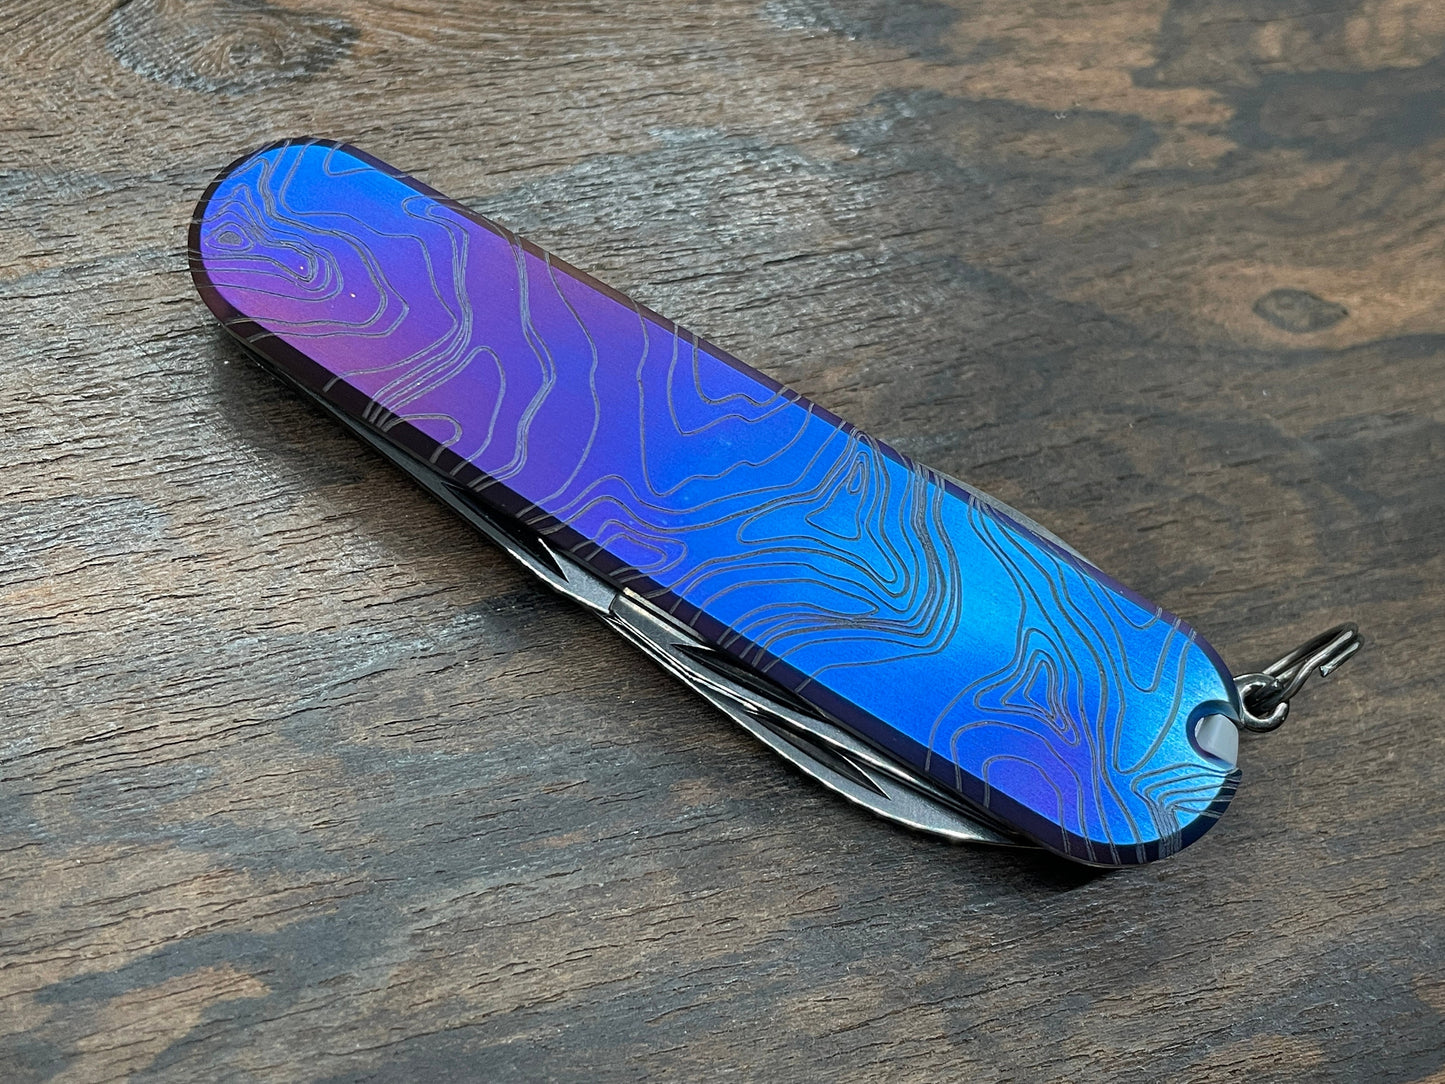 Flamed TOPO 91mm Titanium Scales for Swiss Army SAK